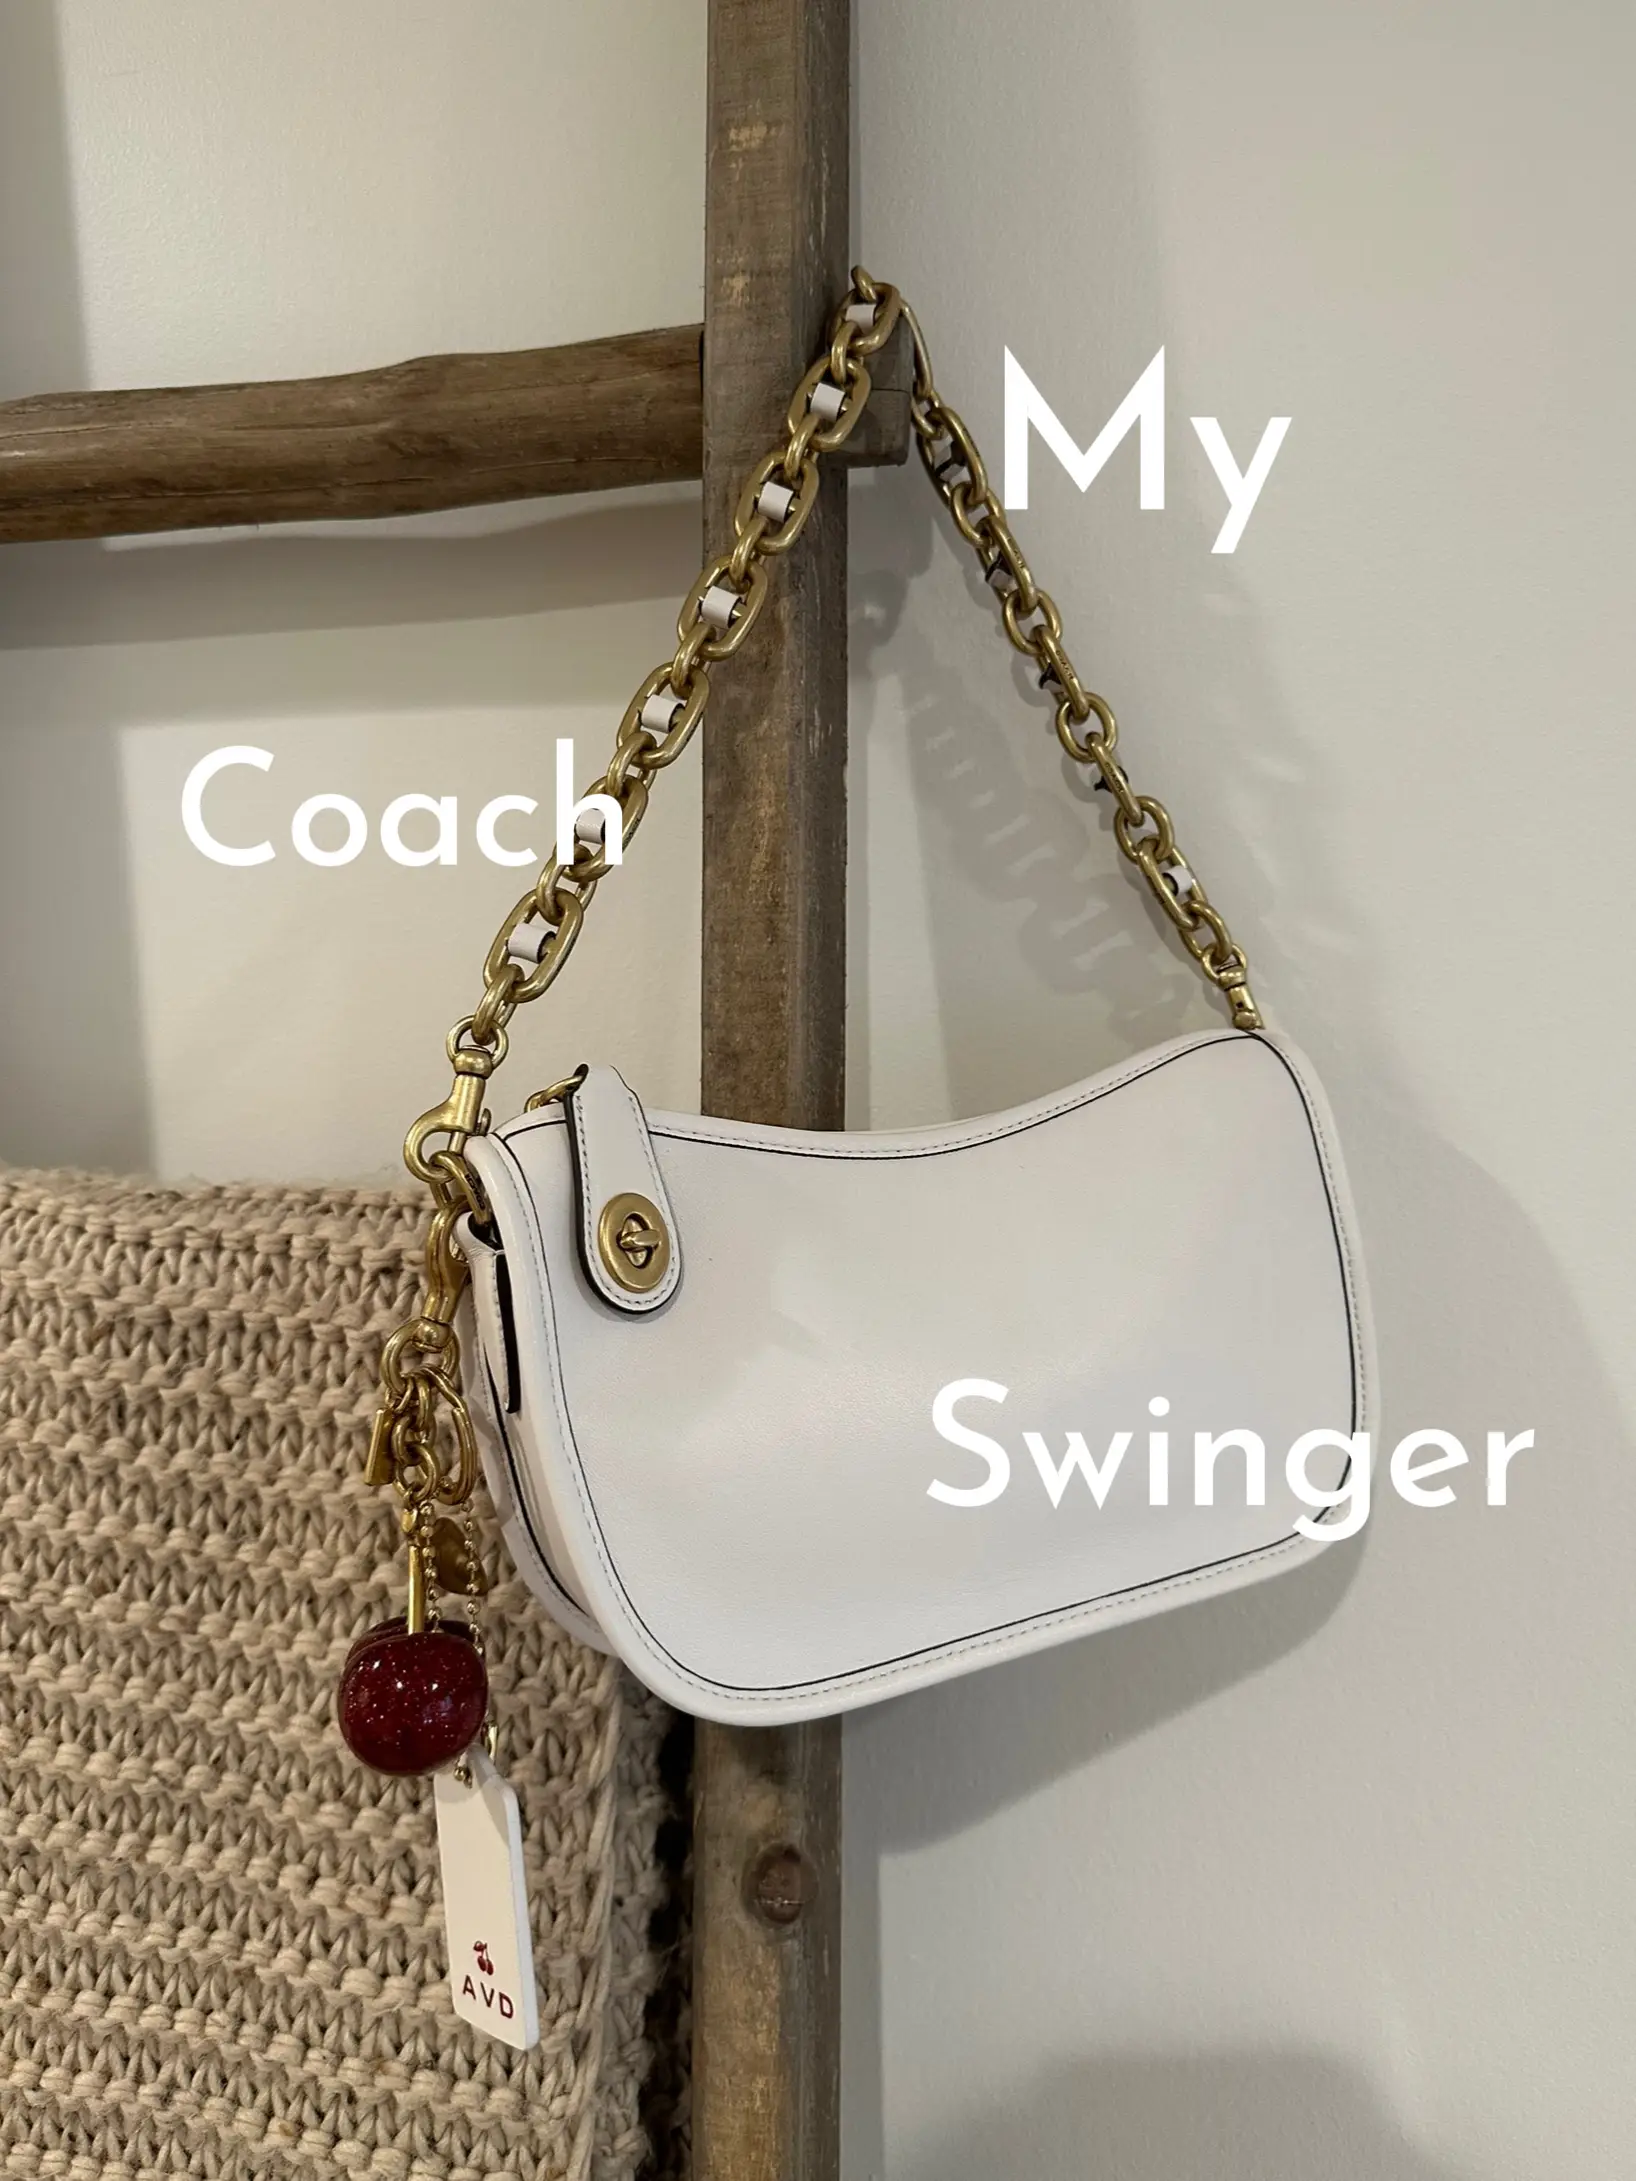 The Coach Swinger Bag Brings Me Back to Where It All Started